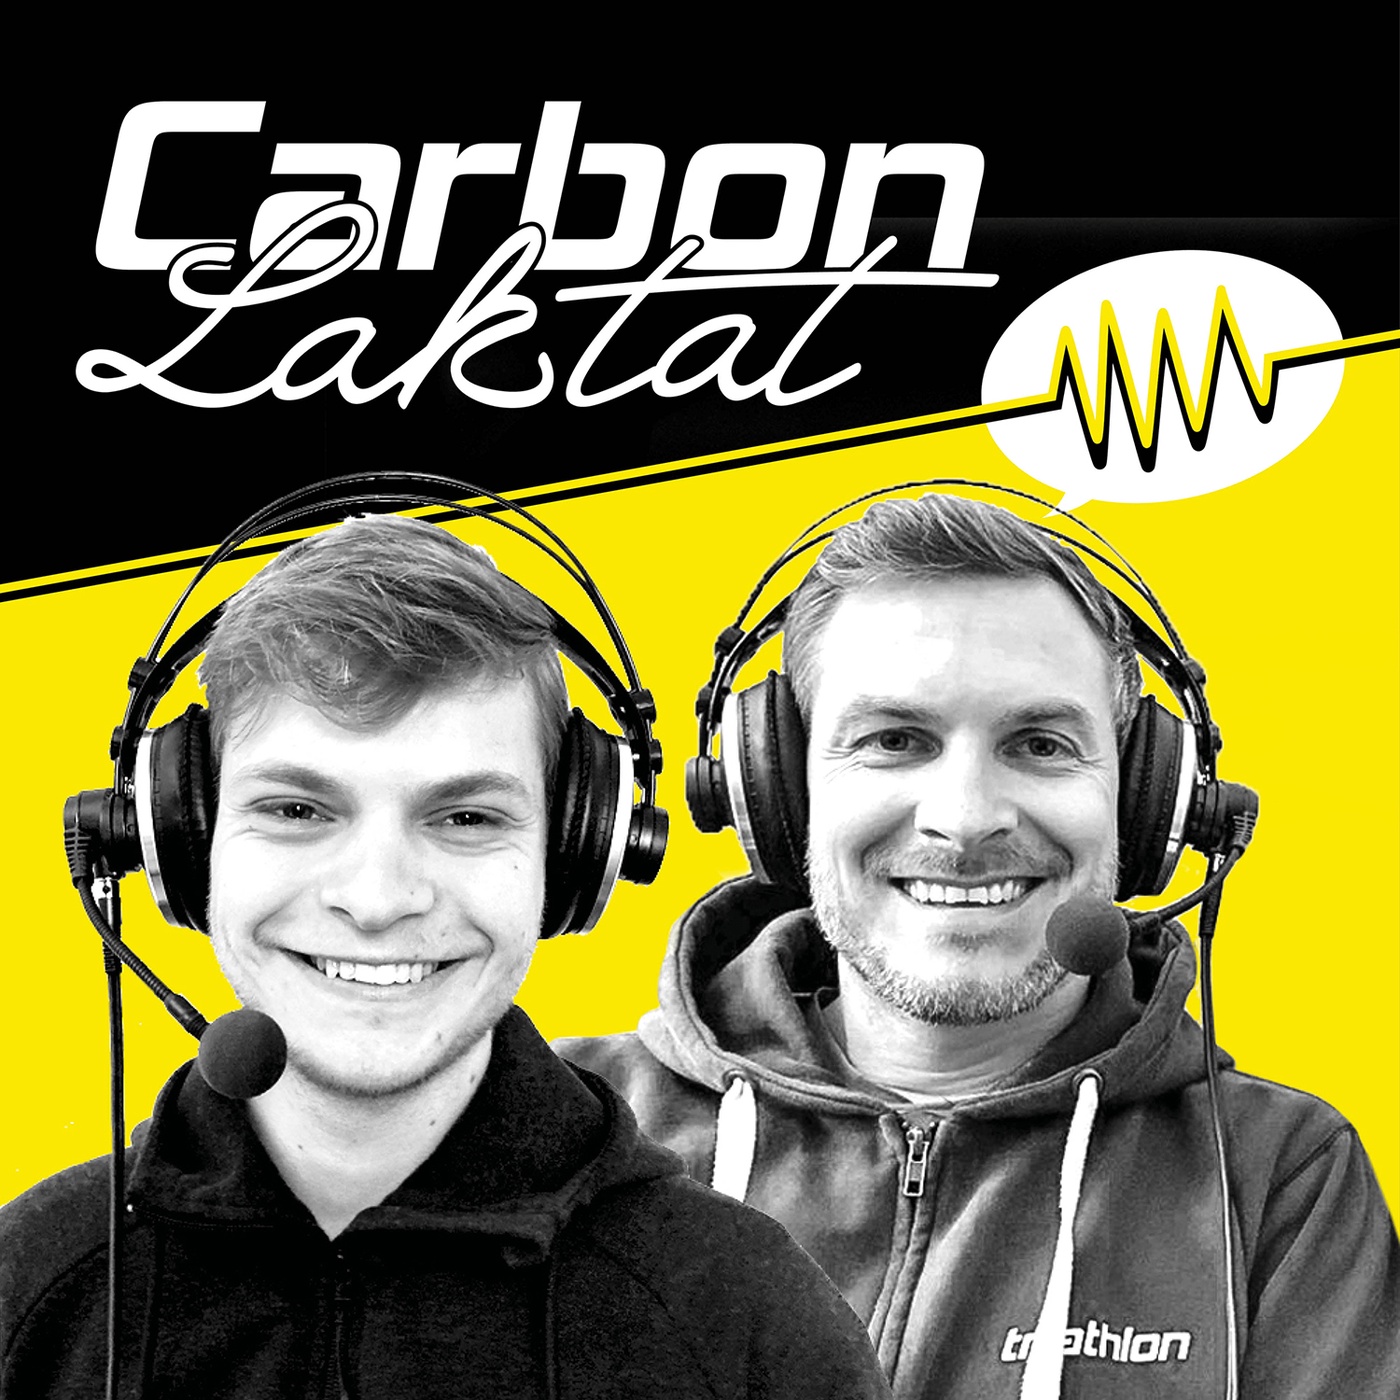 Carbon & Laktat: (Fast) alle sind in Roth